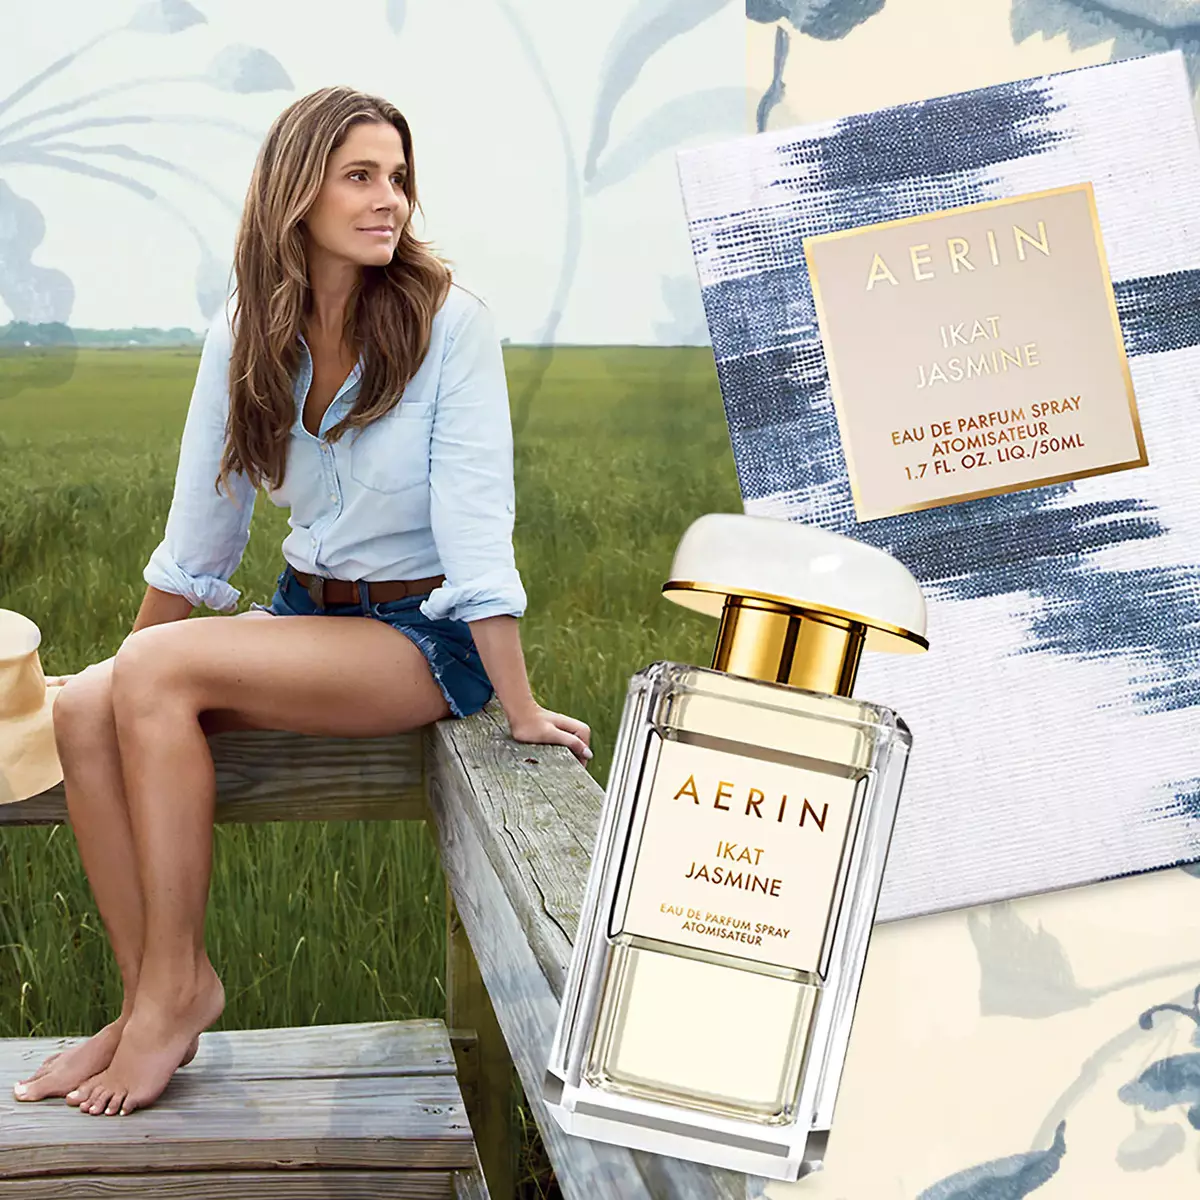 Perfumes Aerin Lauder: Perfume Amber Musk, Tangier Vanille and other perfumes, selection criteria 25206_8